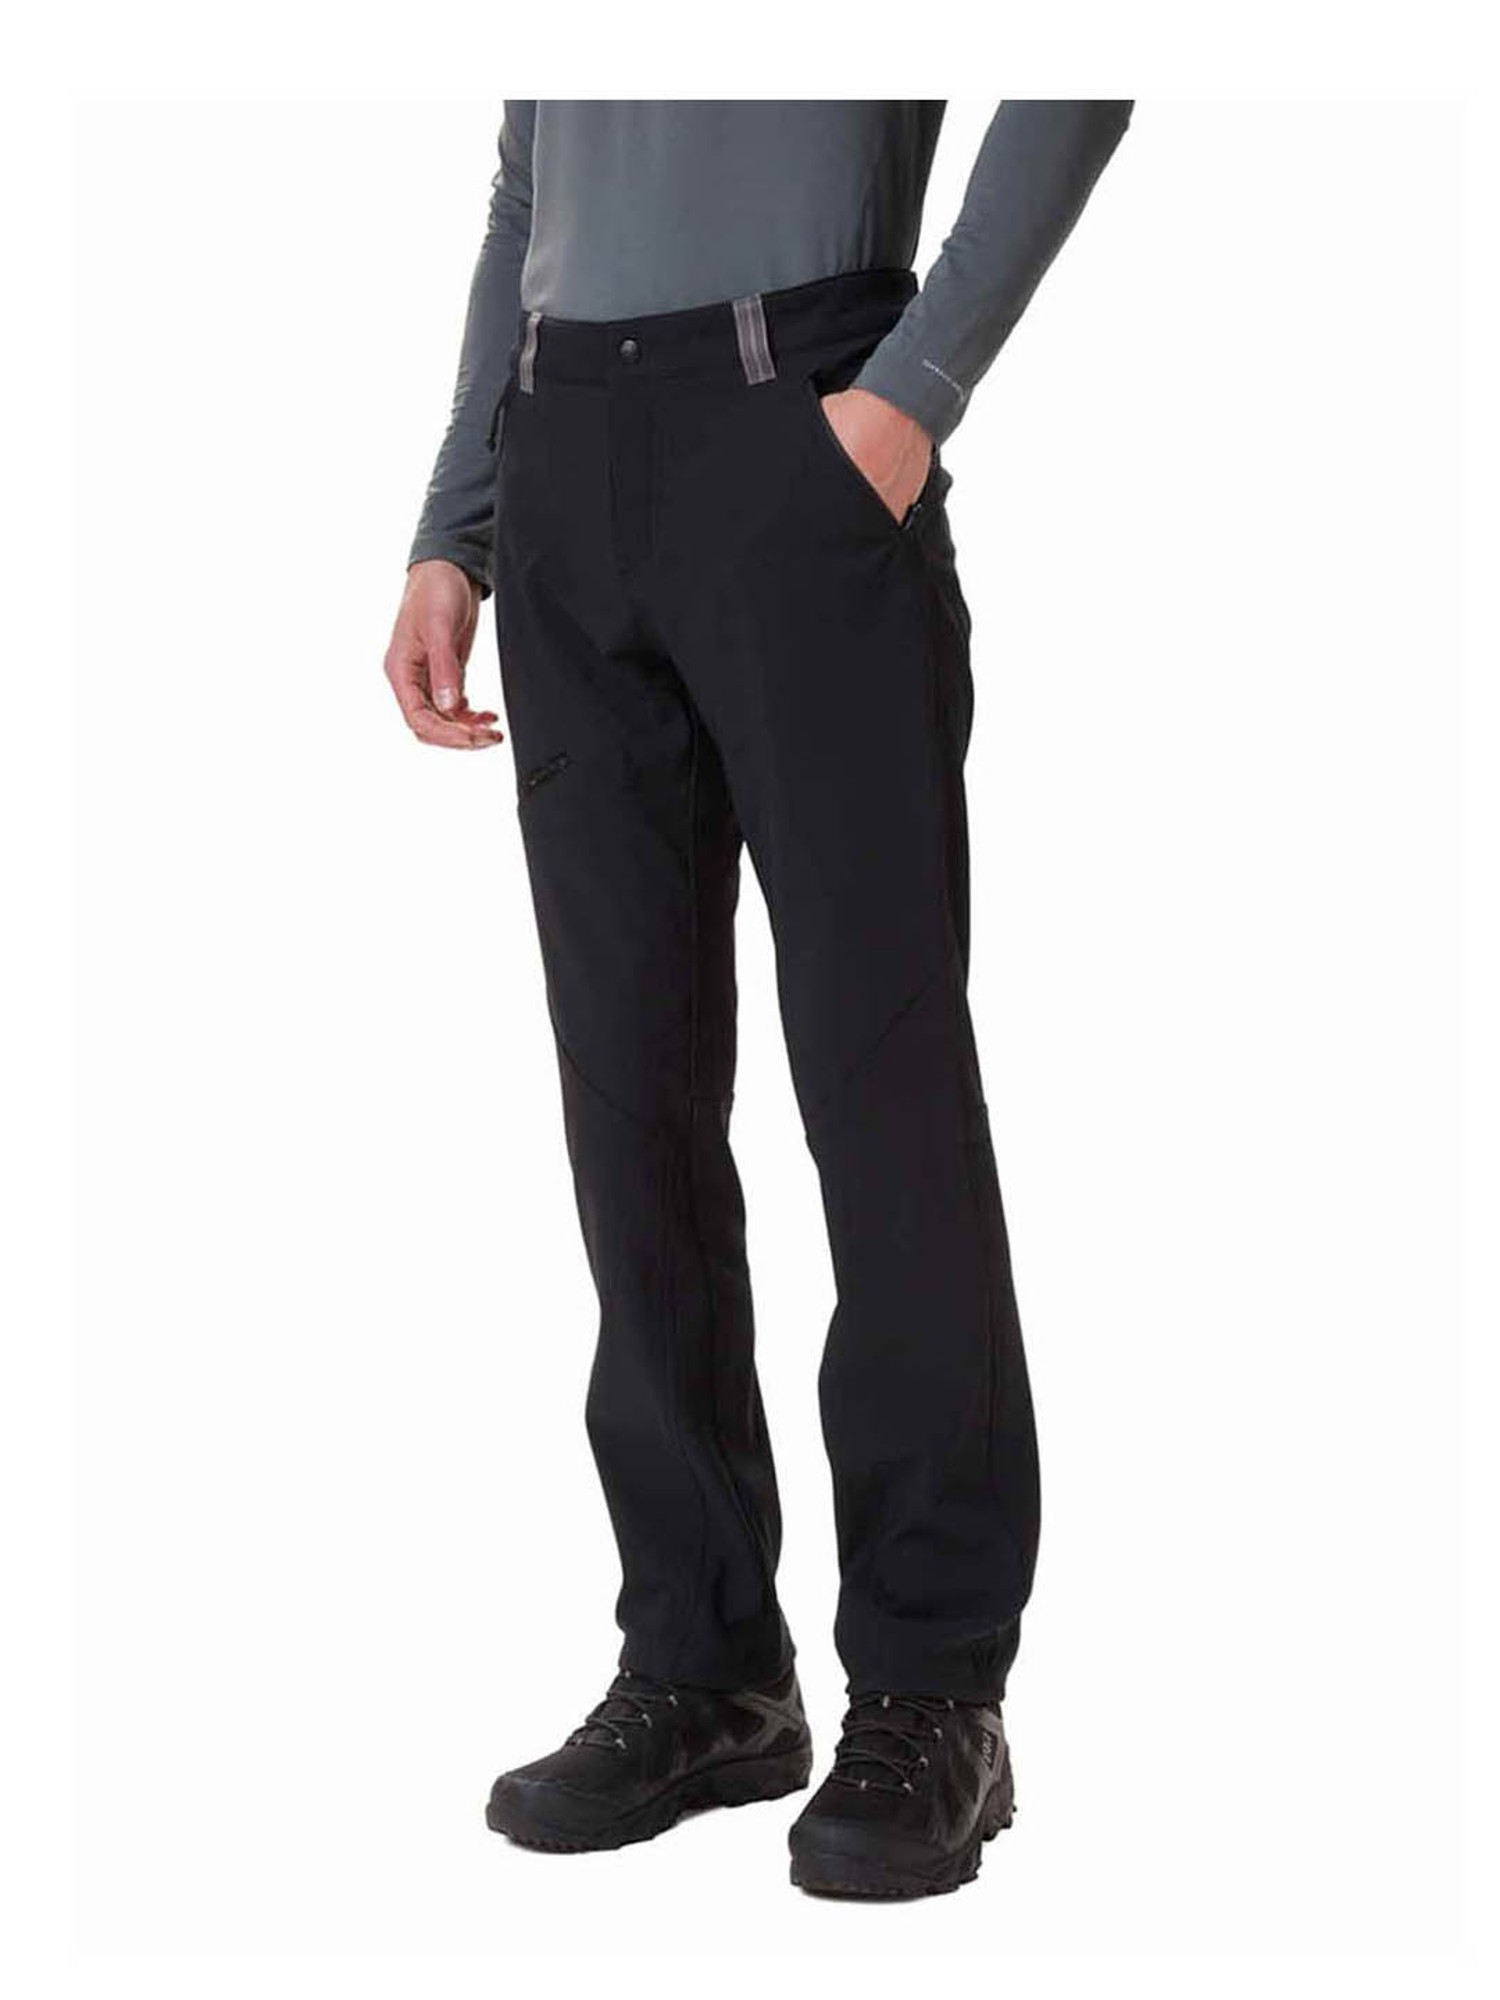 The Best Womens Quick Dry Pants for Travel 12 Awesome Reader Picks